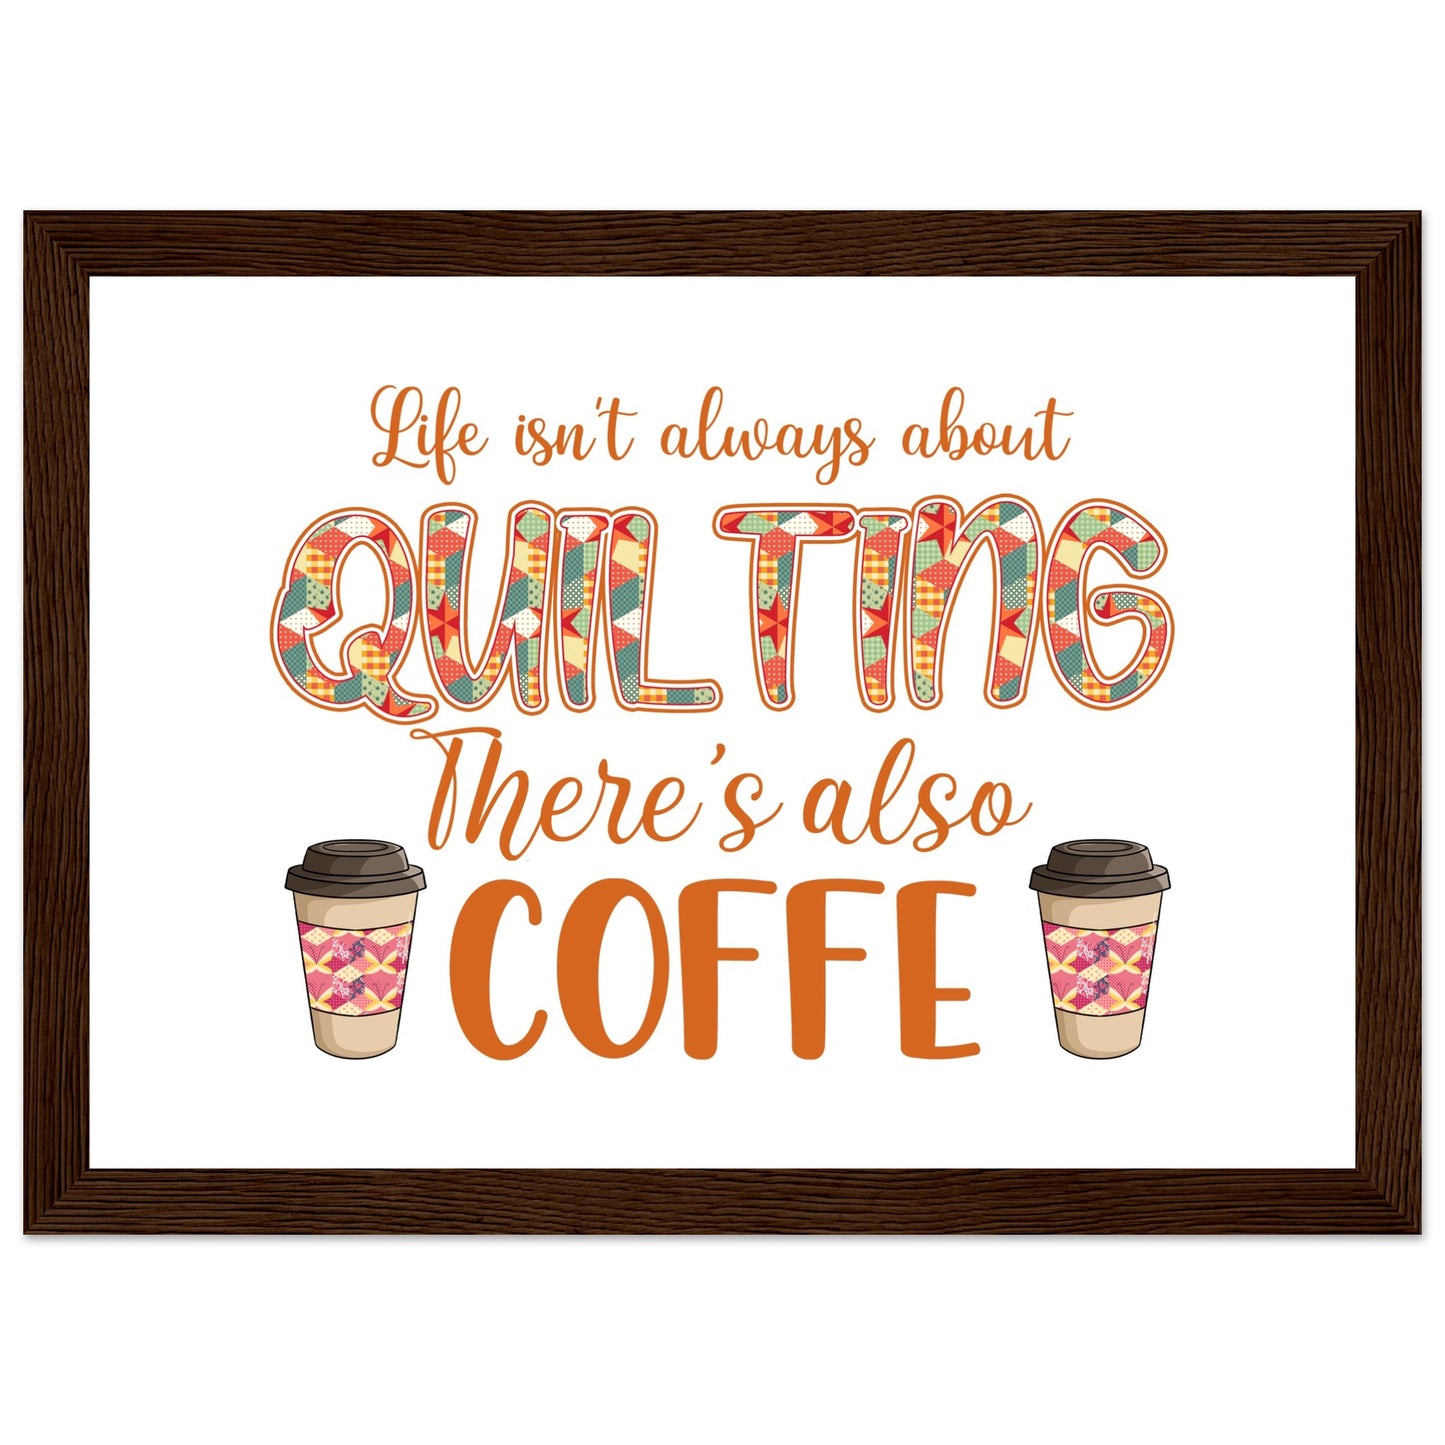 Life Isn't Always About Quilting There's Also Coffee - Quilting Wall Art - Premium Matte Paper Wooden Framed Poster